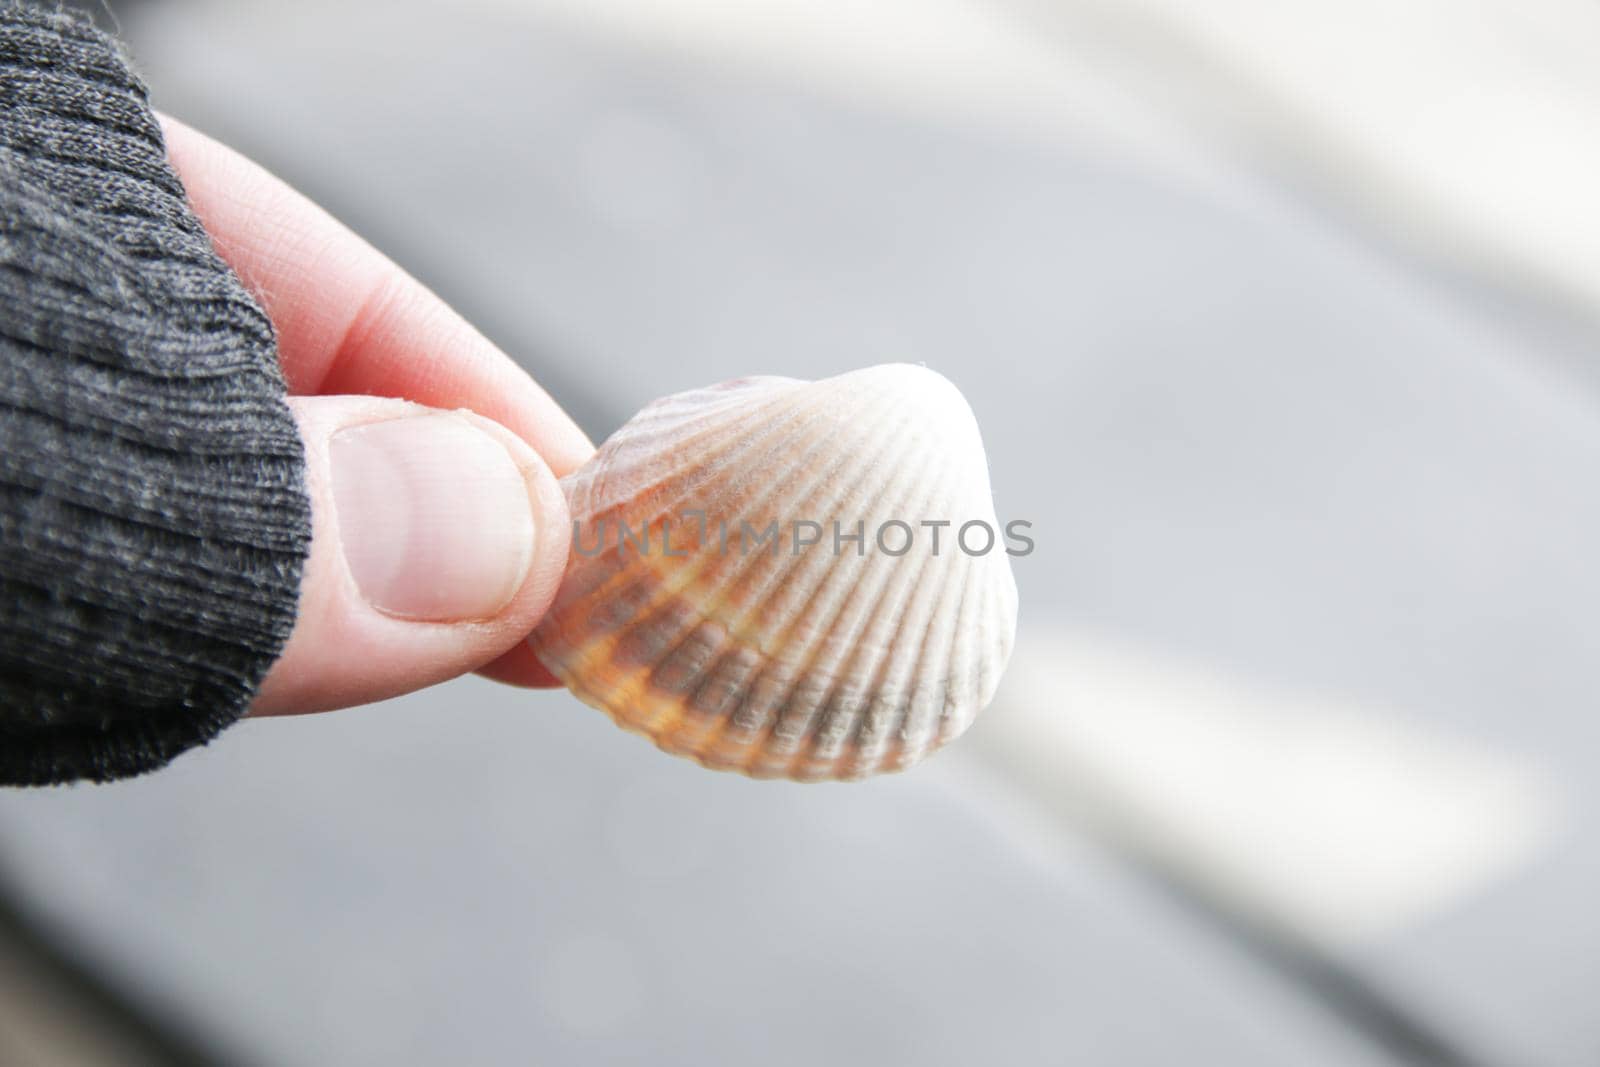 Hand holding a seashell on a blurred background by Markgraf